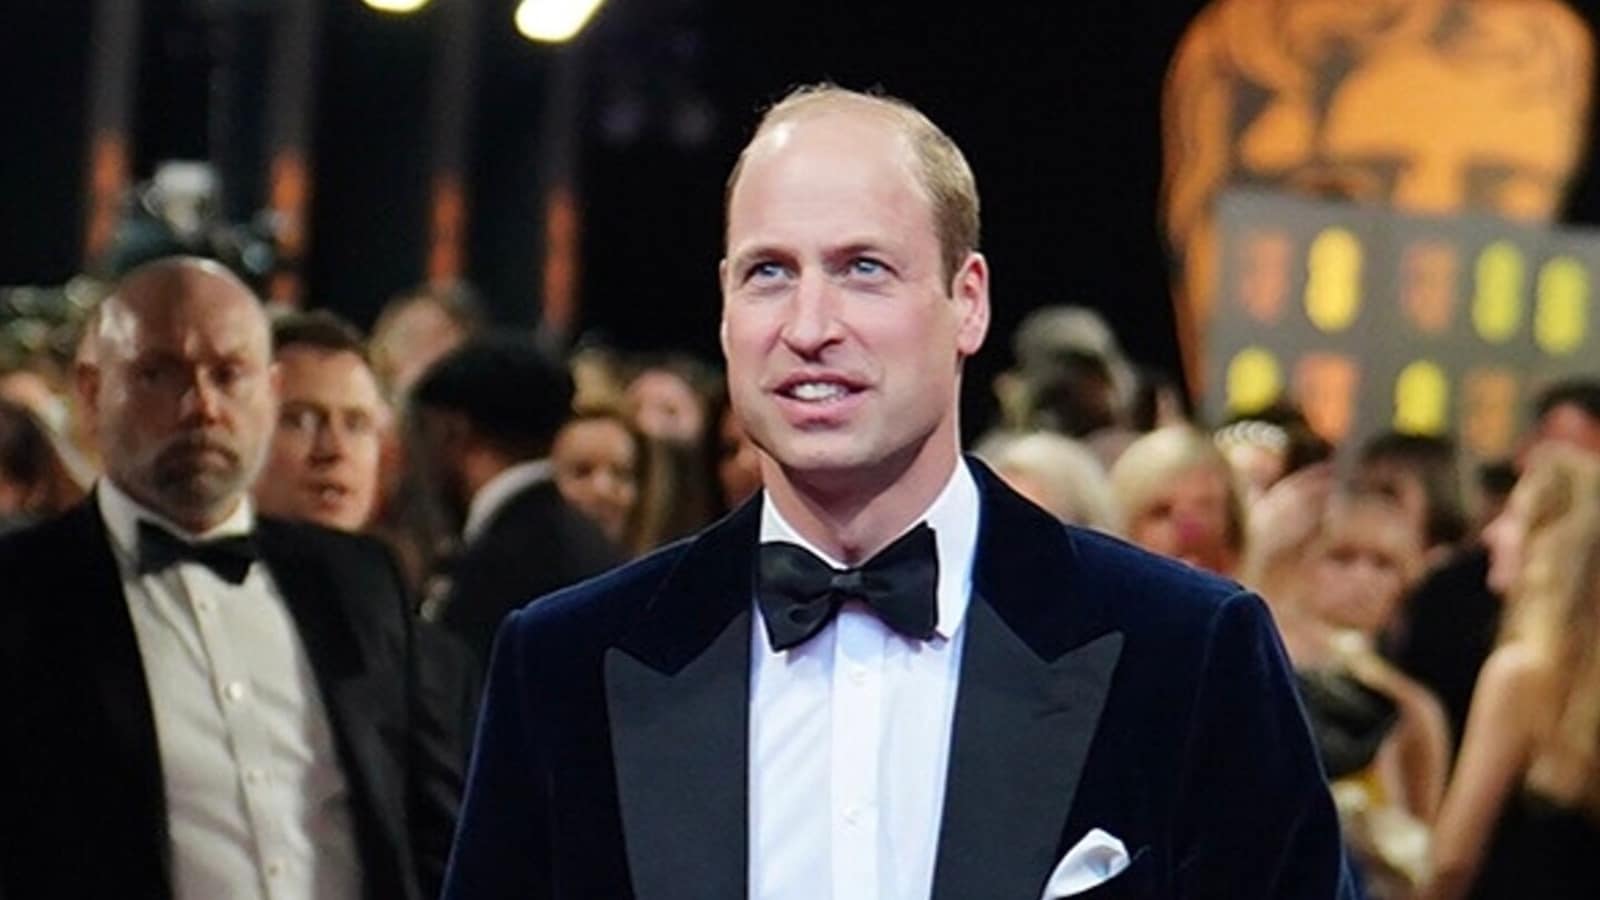 Prince William paid $2.5 million while on vacation? Here’s how much the British royal earns